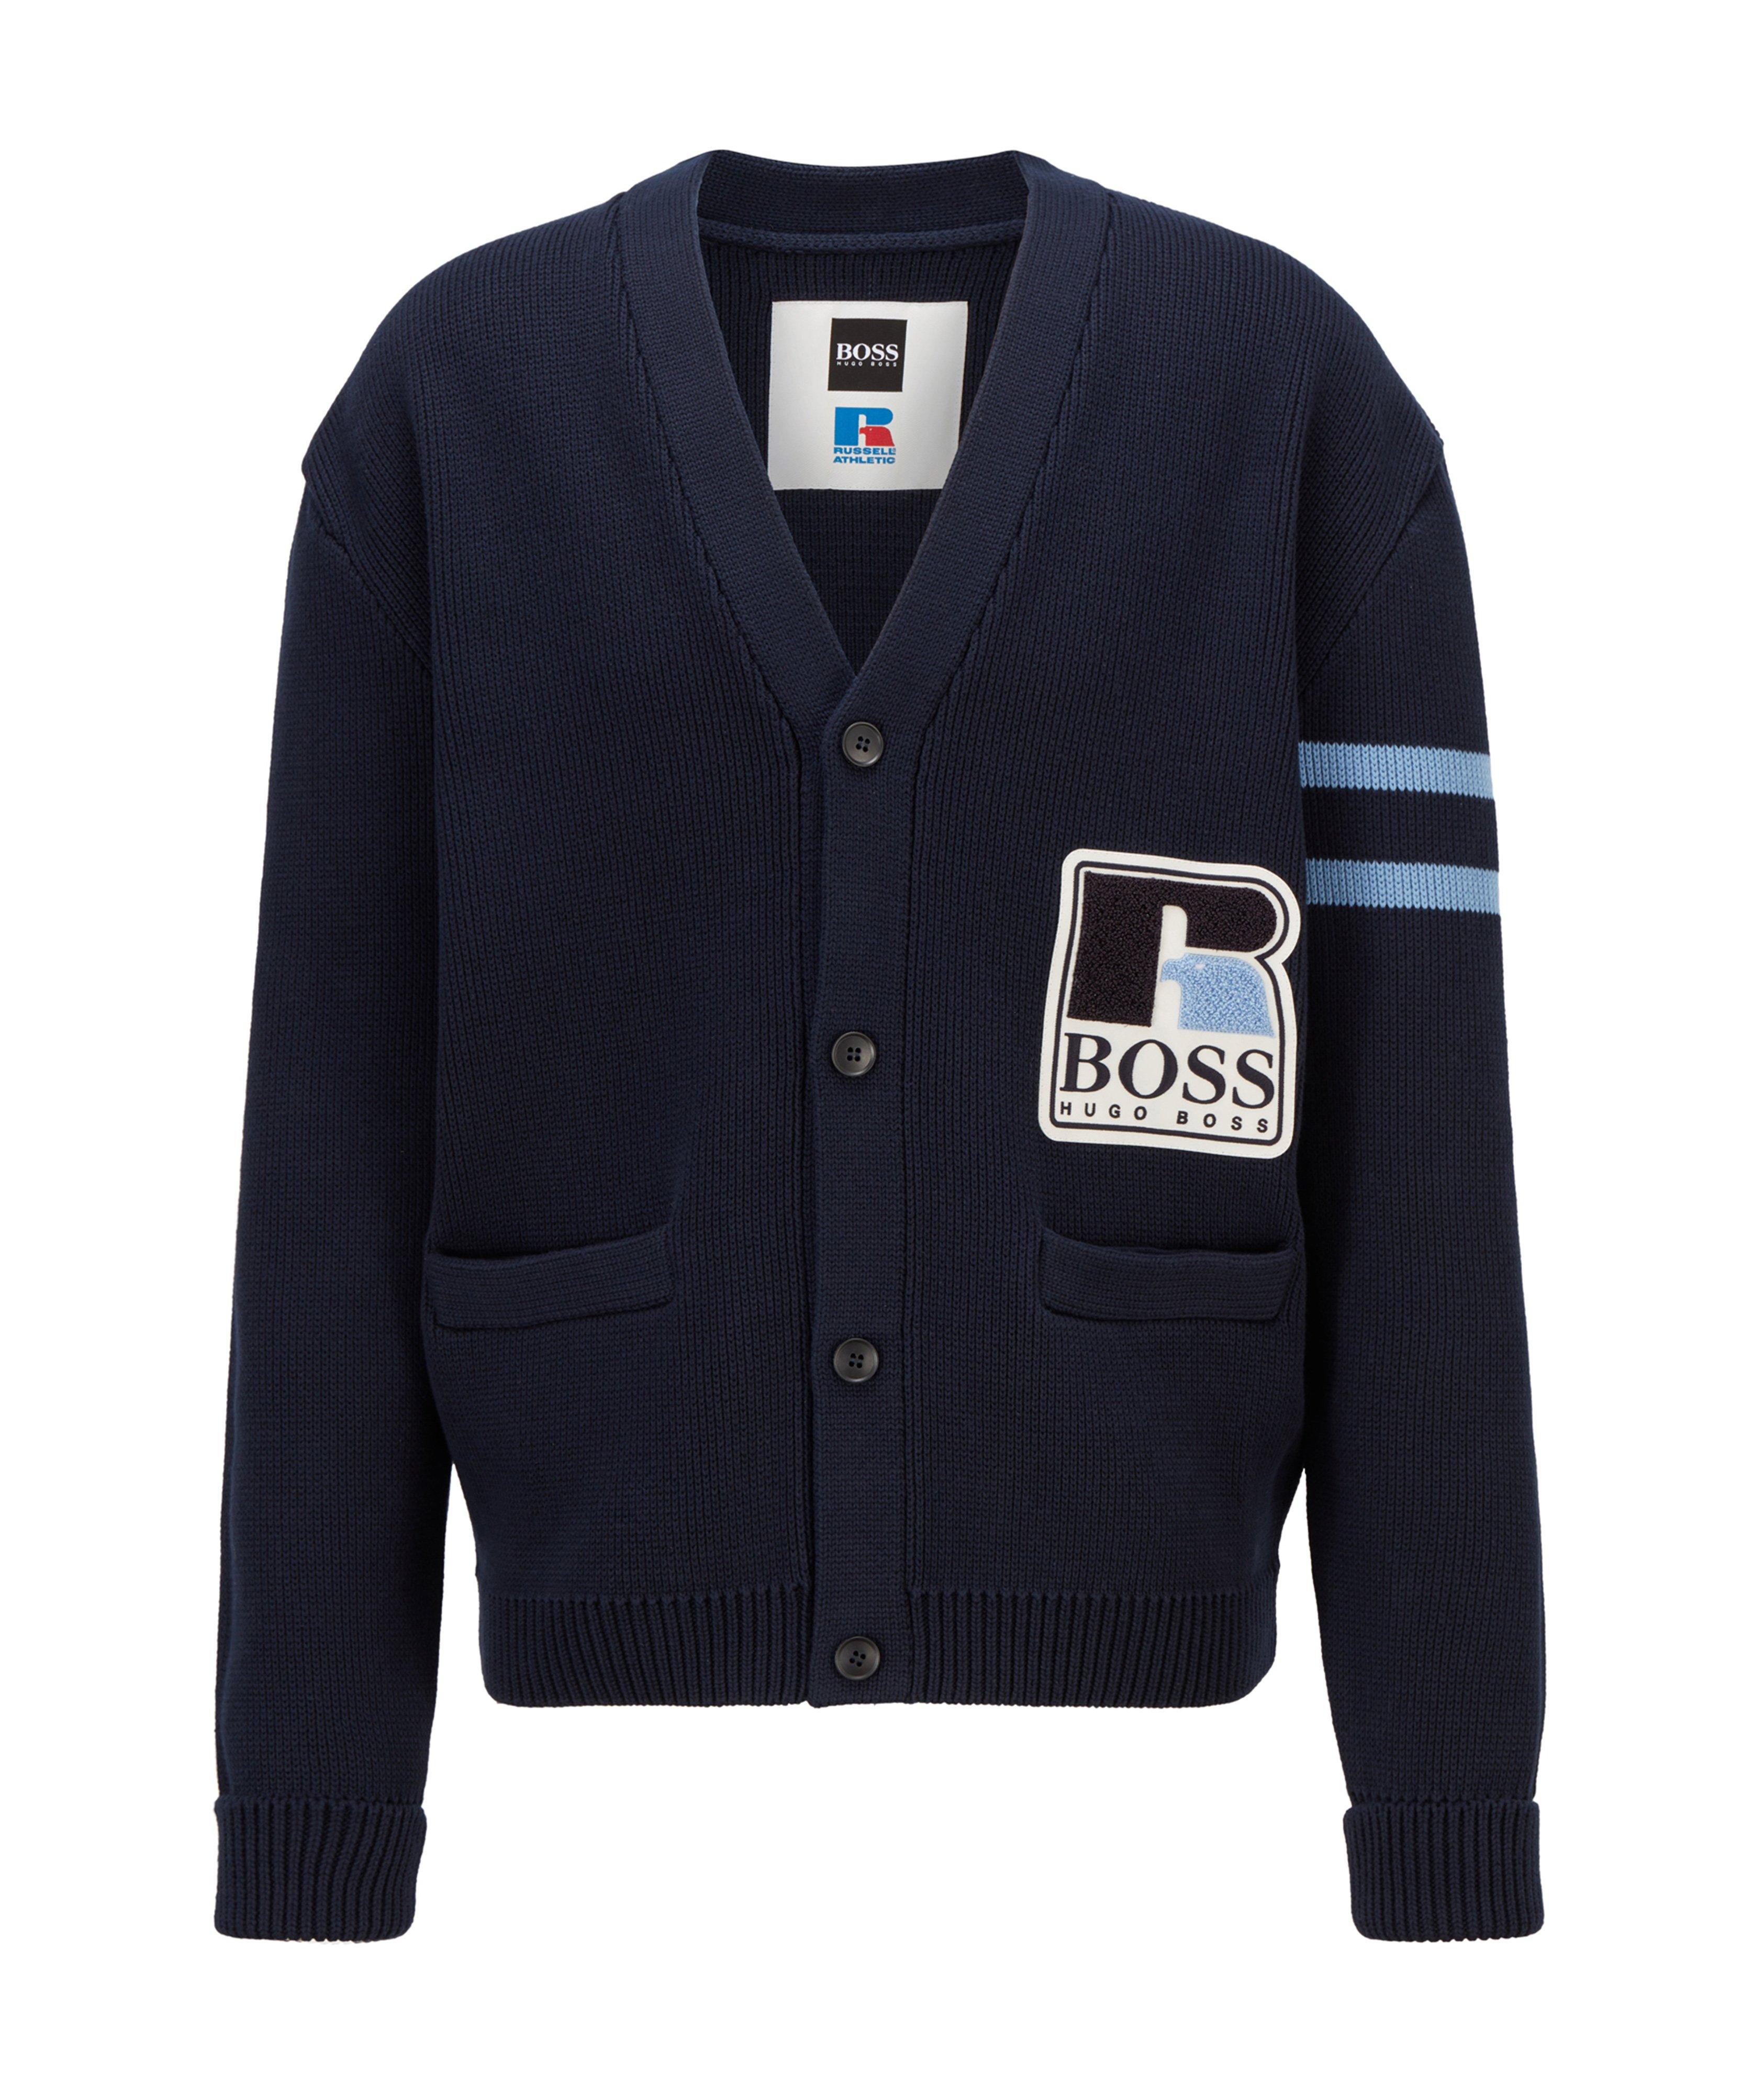 BOSS x Russell Athletic Cardigan  image 0